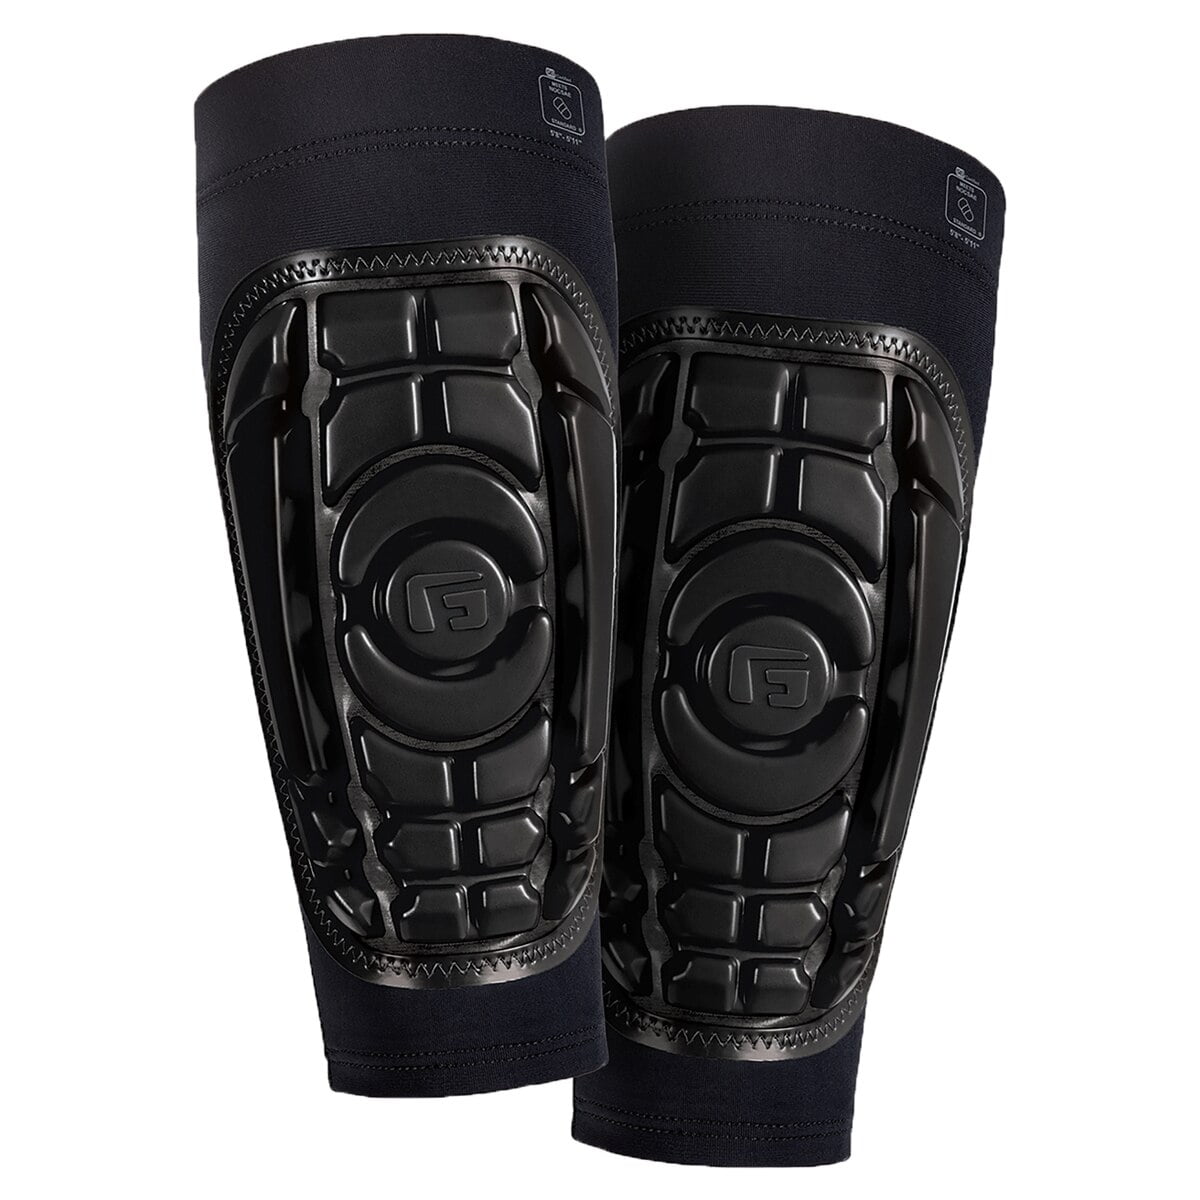 3-7Years 2 Pairs Football shin pads boys girls,Sizes Small and Large... 